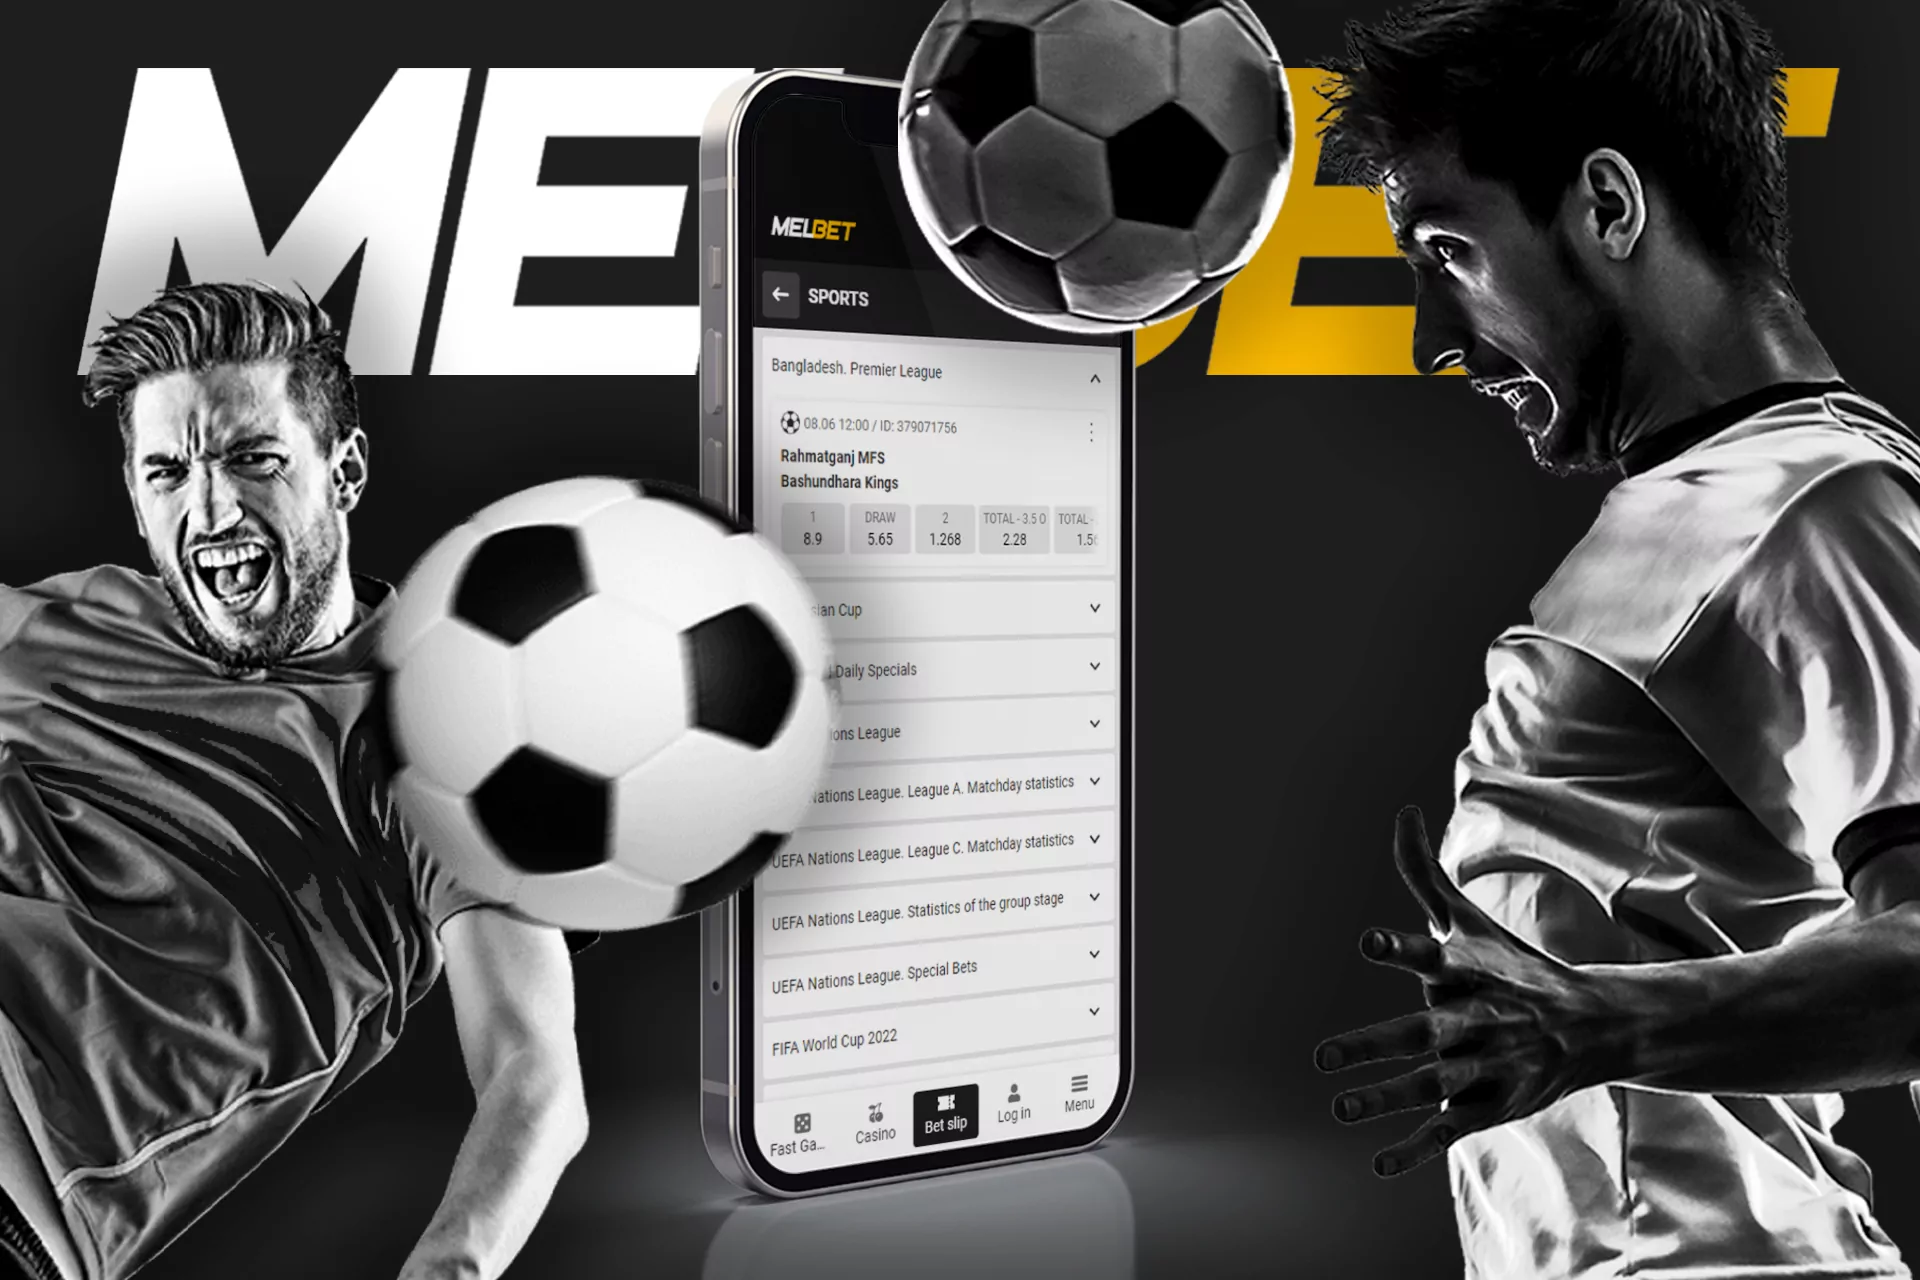 You can place bets on football events in the Melbet app.